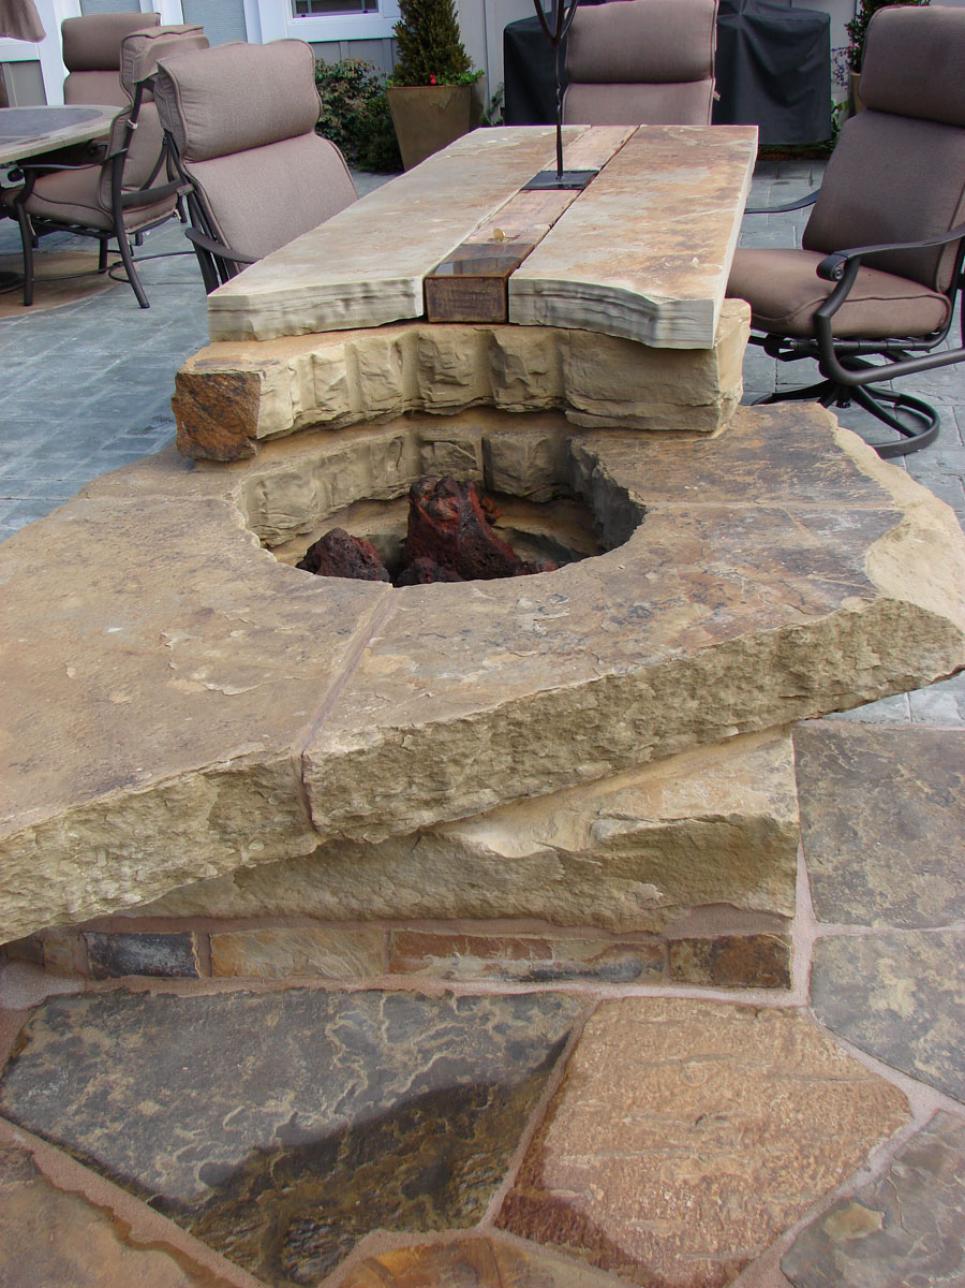 Stone Fire Pit and Table Surrounded By Chairs